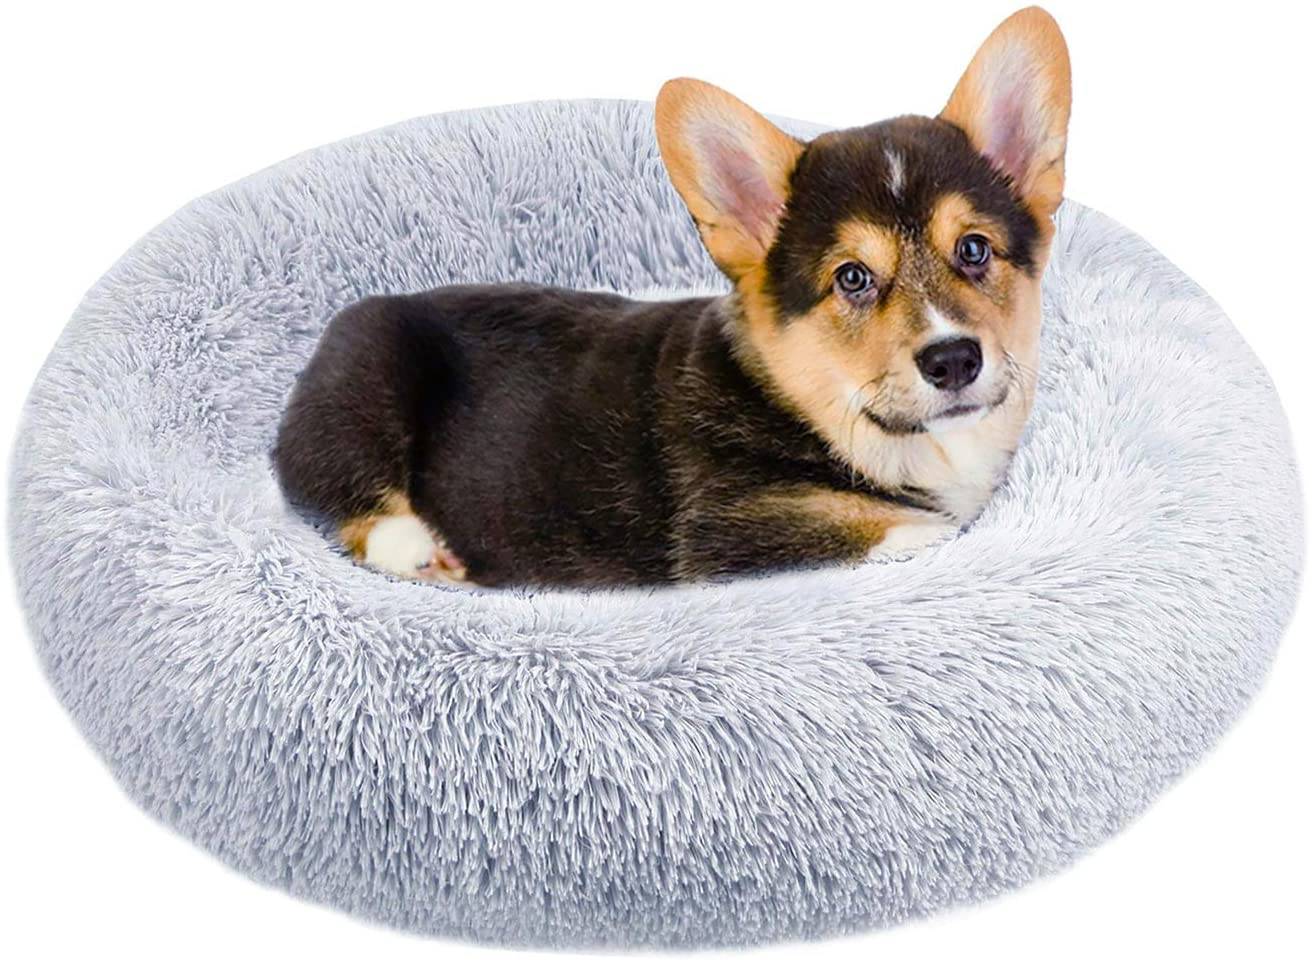 GROOBOLL Cat Bed, Donut Dog Bed, Anti-Anxiety Plush Calming Dog Bed, Soft Fuzzy round Dog Bed, Washable Fluffy Dog Beds for Small Medium Dogs and Cats (20"/24"/28")